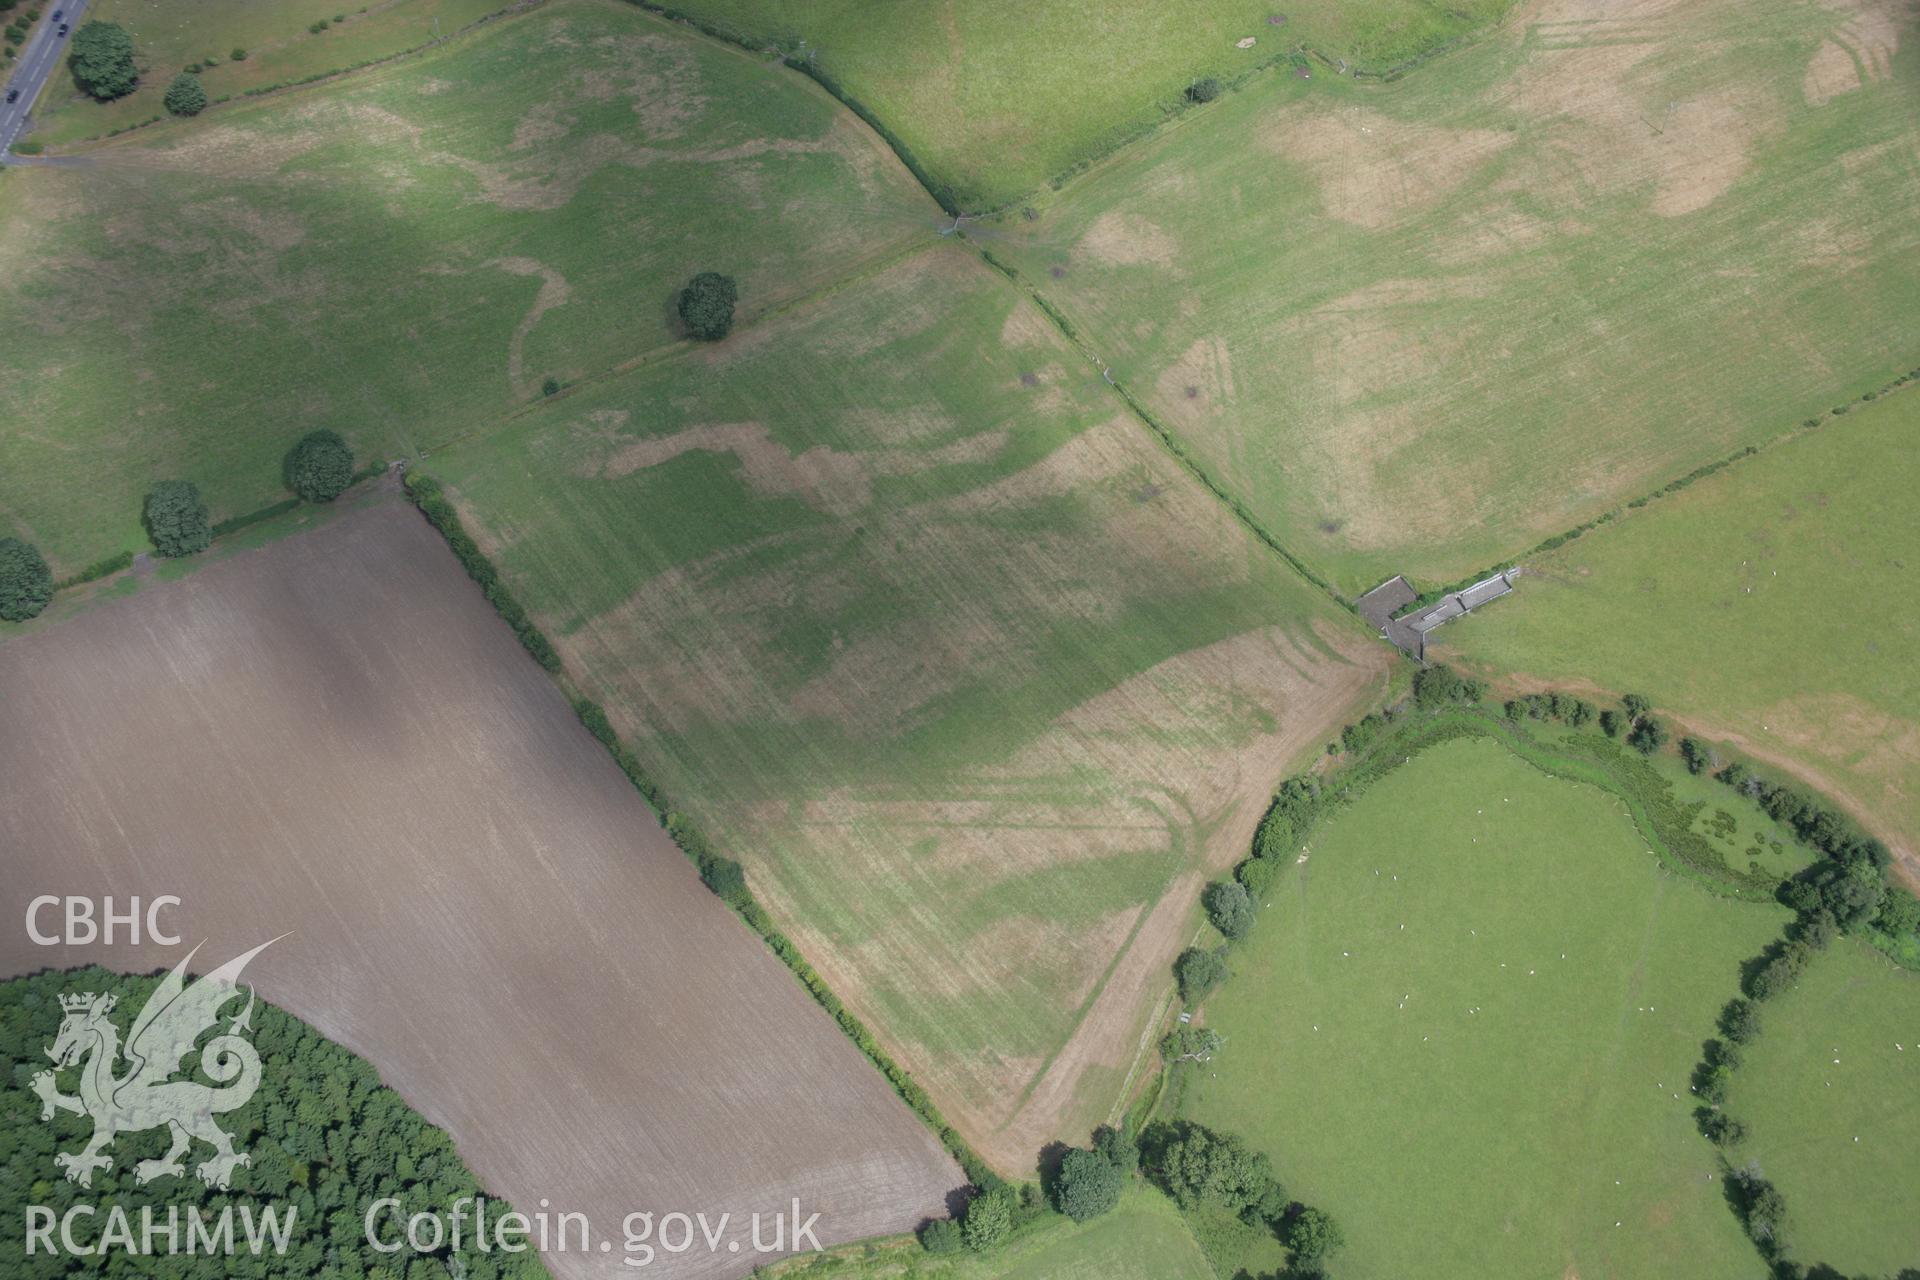 RCAHMW colour oblique aerial photograph of Llanfor Roman Military Complex visible in cropmarks, viewed from the west. Taken on 31 July 2006 by Toby Driver.